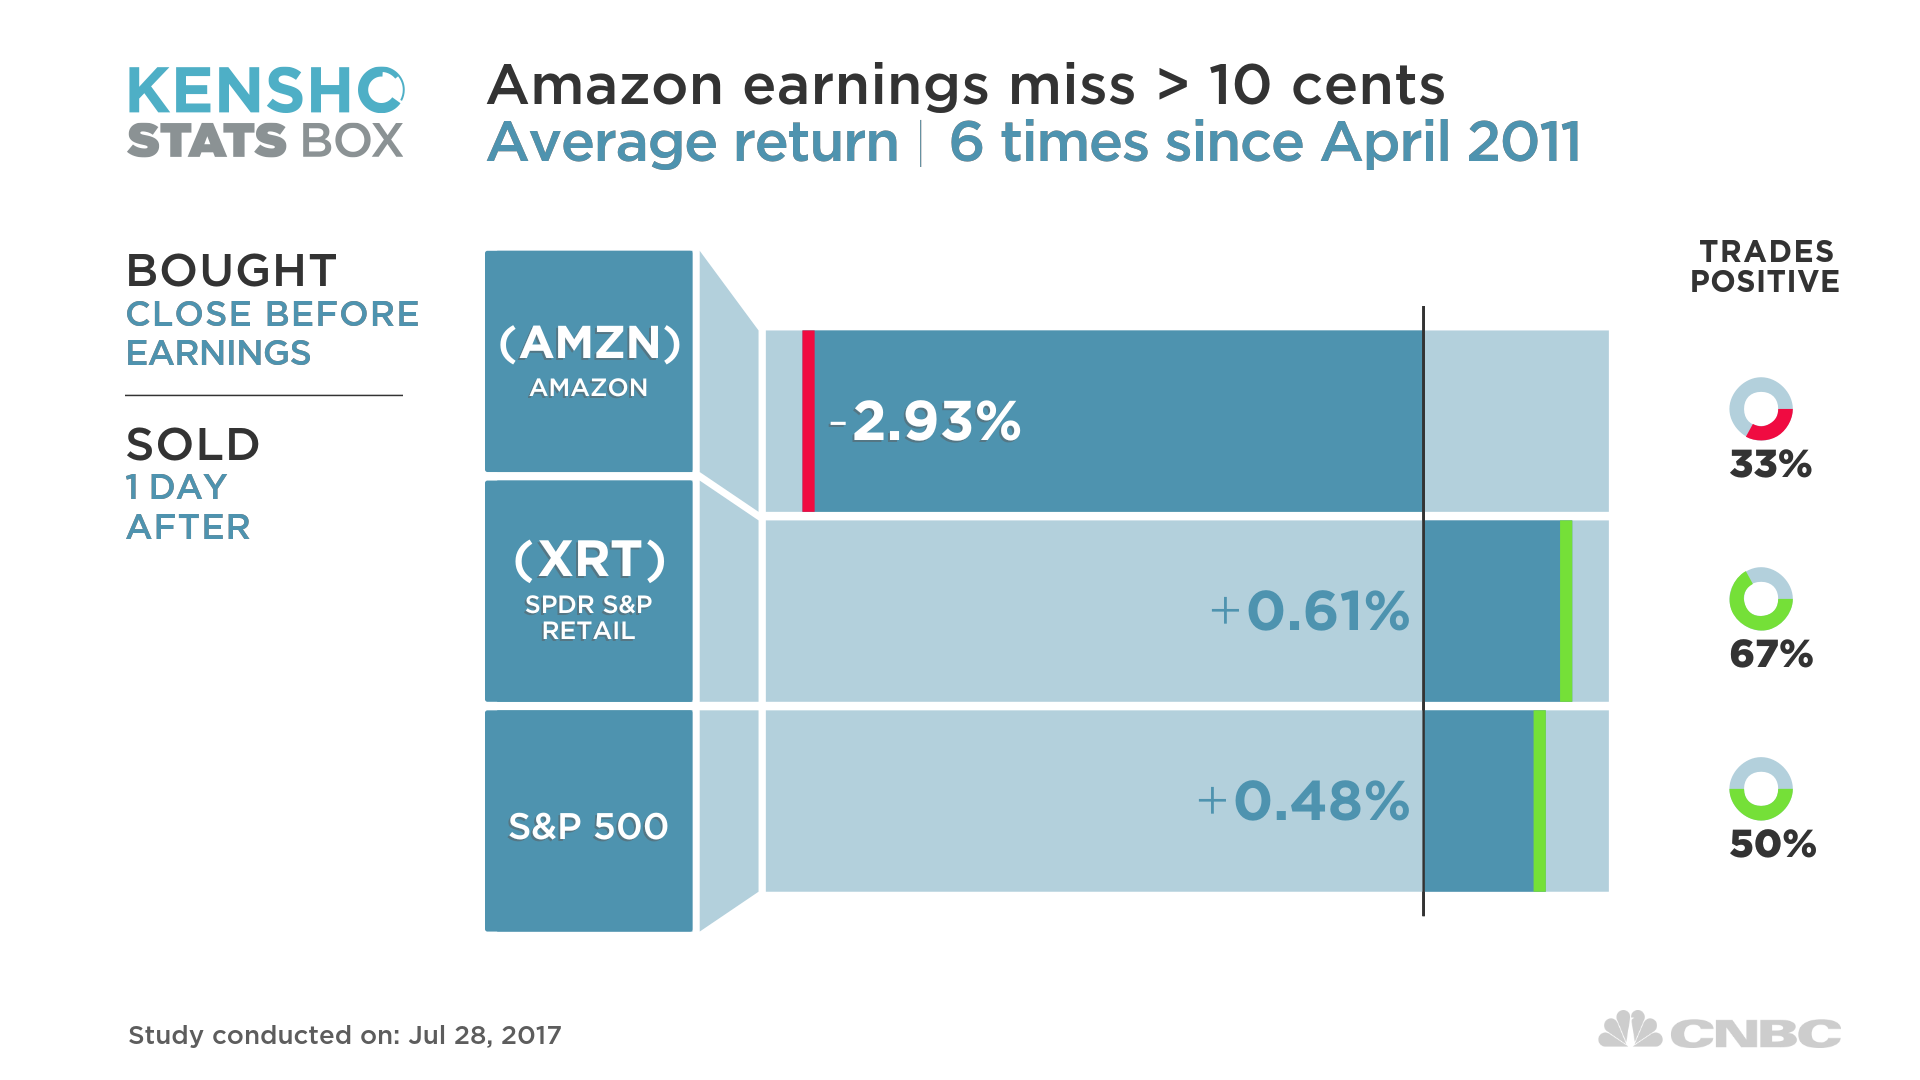 Amazon's stock may struggle awhile after this epic earnings miss, history shows1920 x 1080